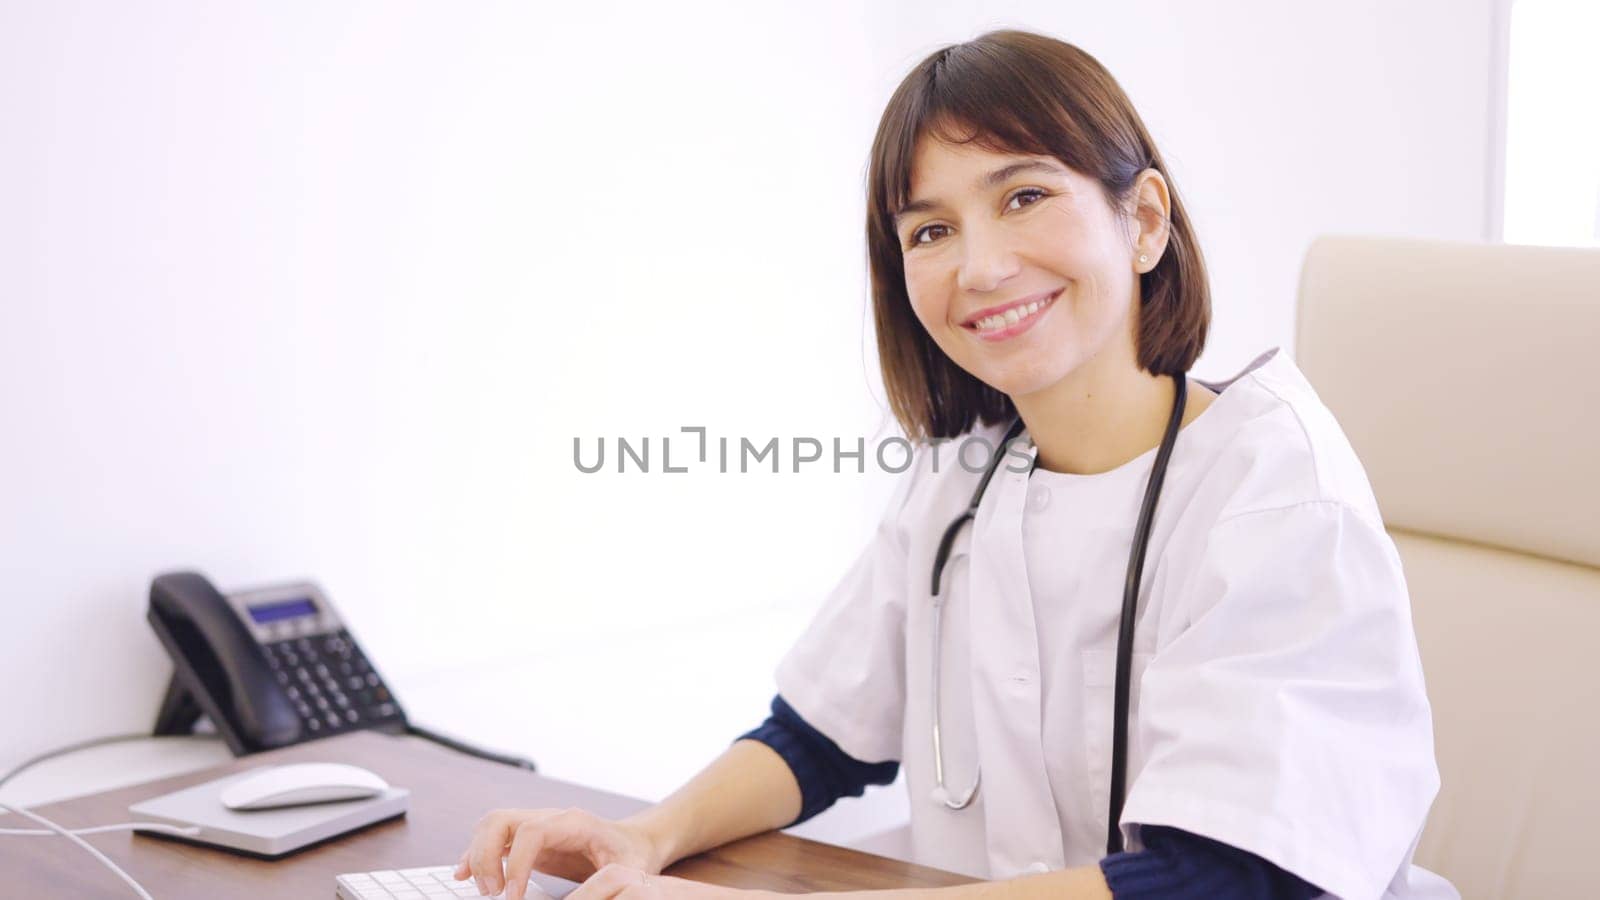 Female doctor using computer and smiling at camera in a clinic